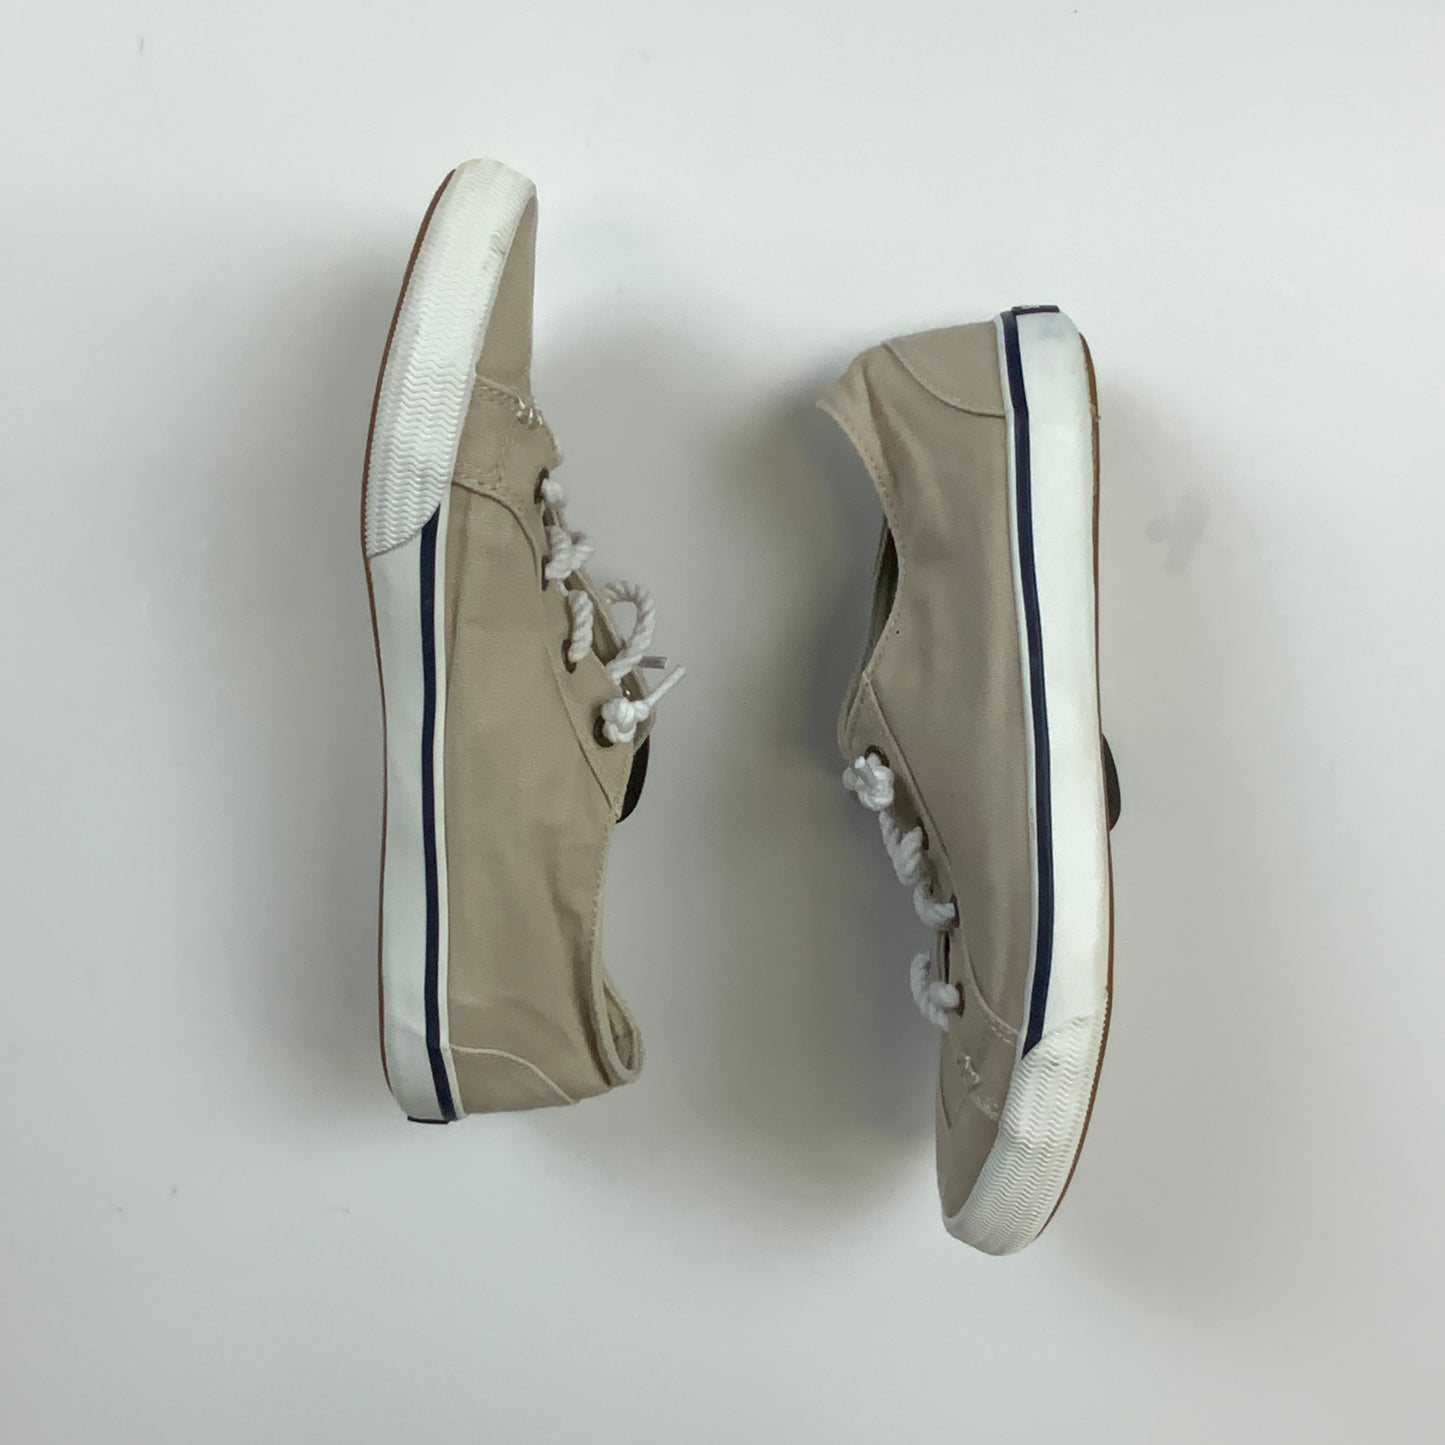 Beige Shoes Sneakers Sperry, Size 8